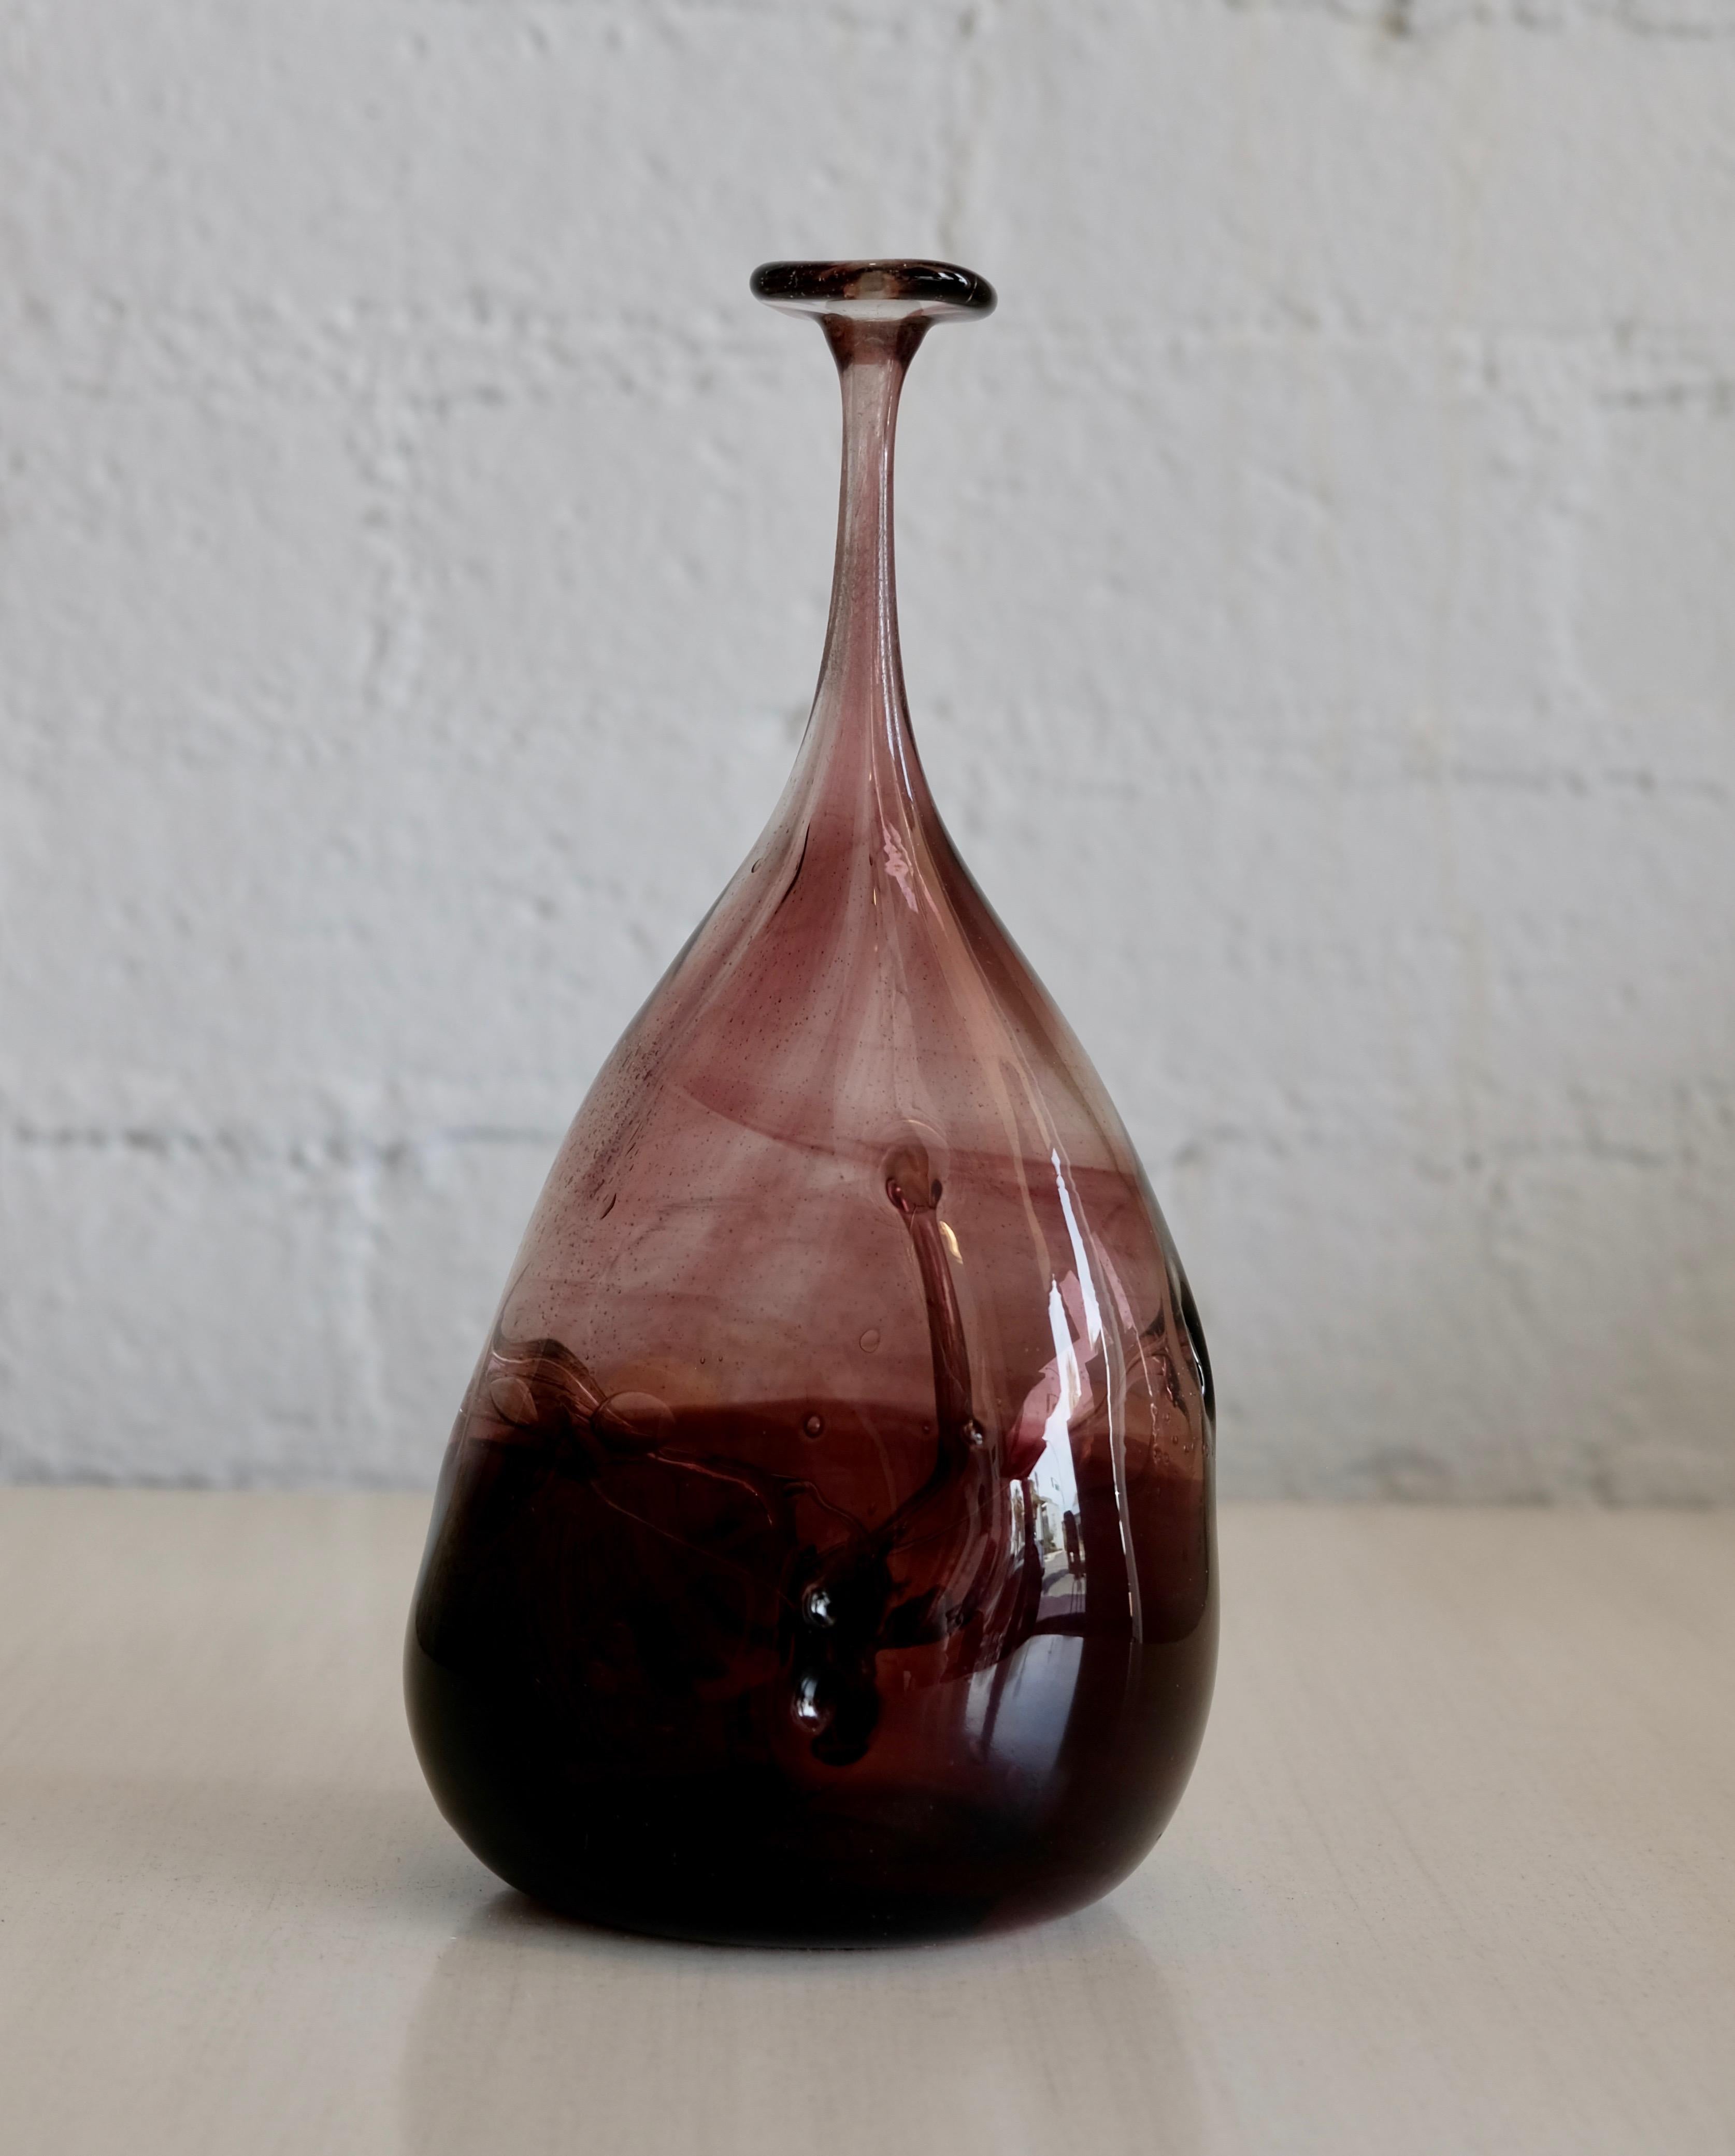 A hand blown art glass vase by Michael Robinson who was at the forefront of the Canadian Glass movement throughout the 1970s. This vase has pulled interior glass layers of that show off his delicate feathering technique. The purplish eggplant colors